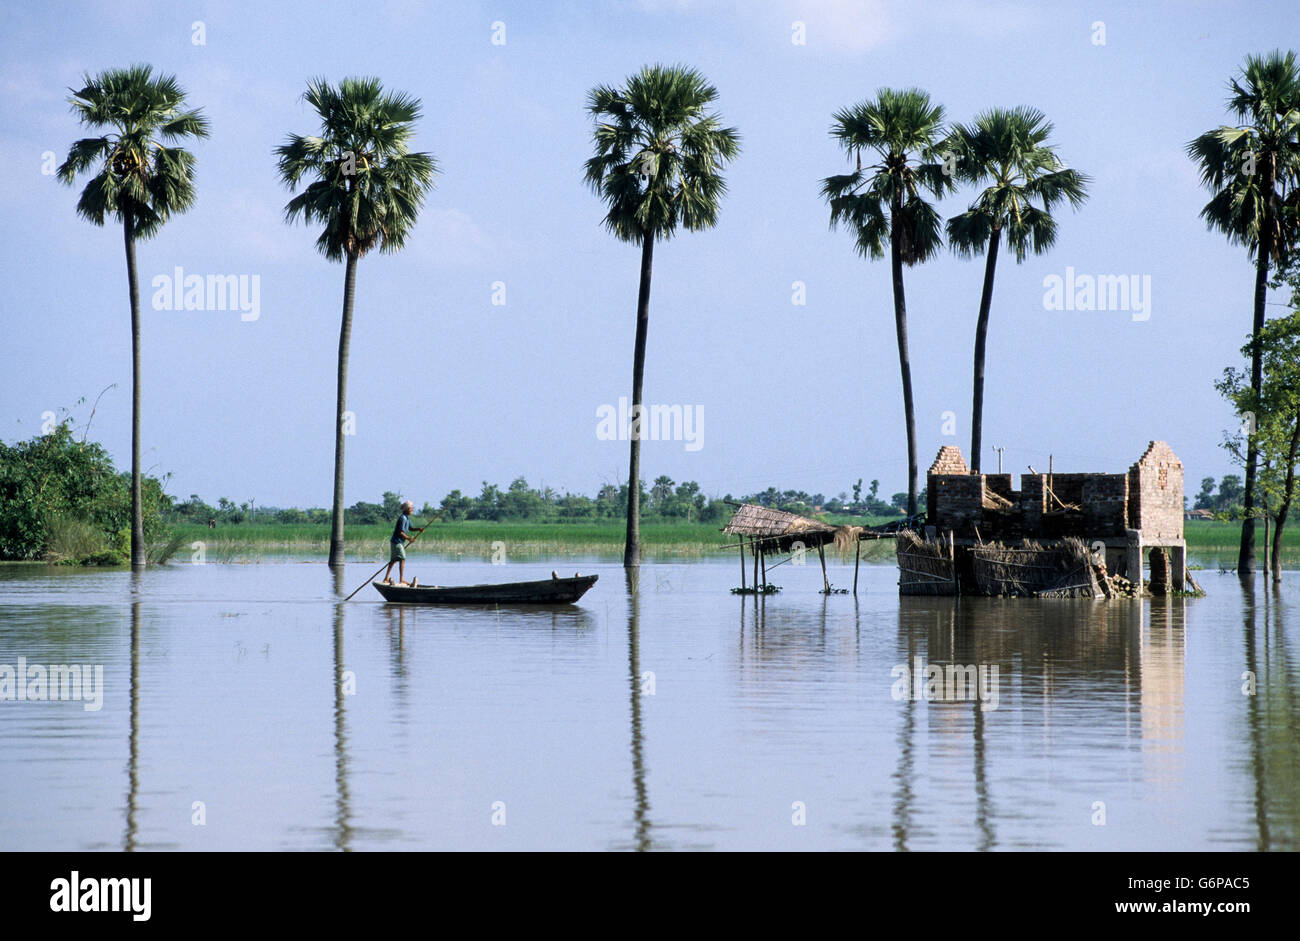 India Bihar , submergence at Bagmati river a branch of ganges due to heavy monsoon rains and melting Himalaya glaciers, transport by boat, reflection of palm tree in the water surface Stock Photo